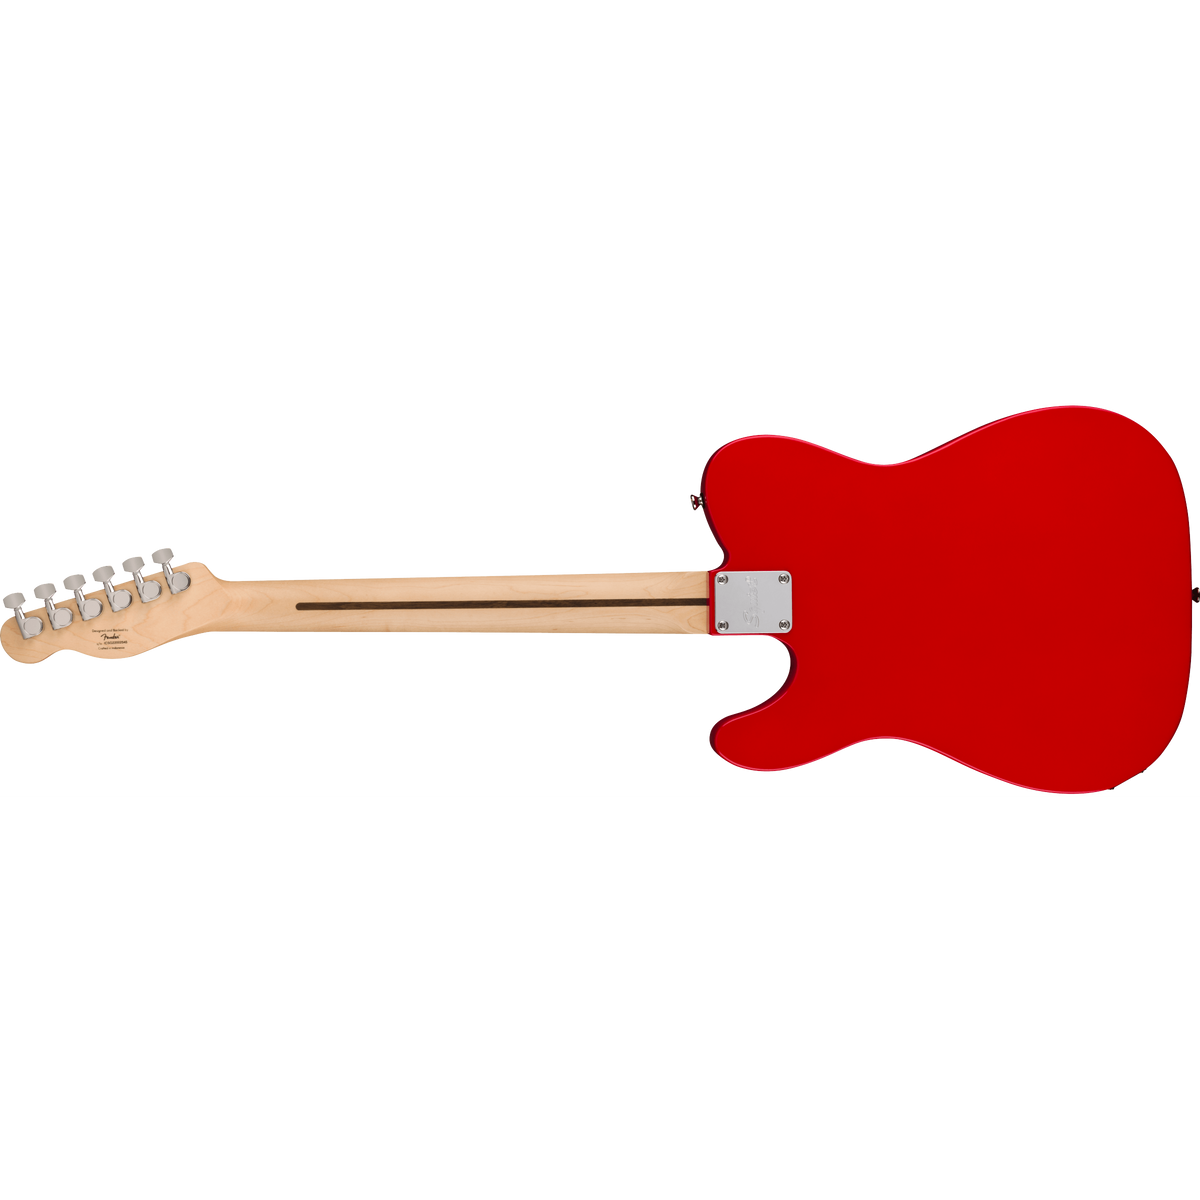 Fender Squier Sonic Telecaster Electric Guitar Torino Red